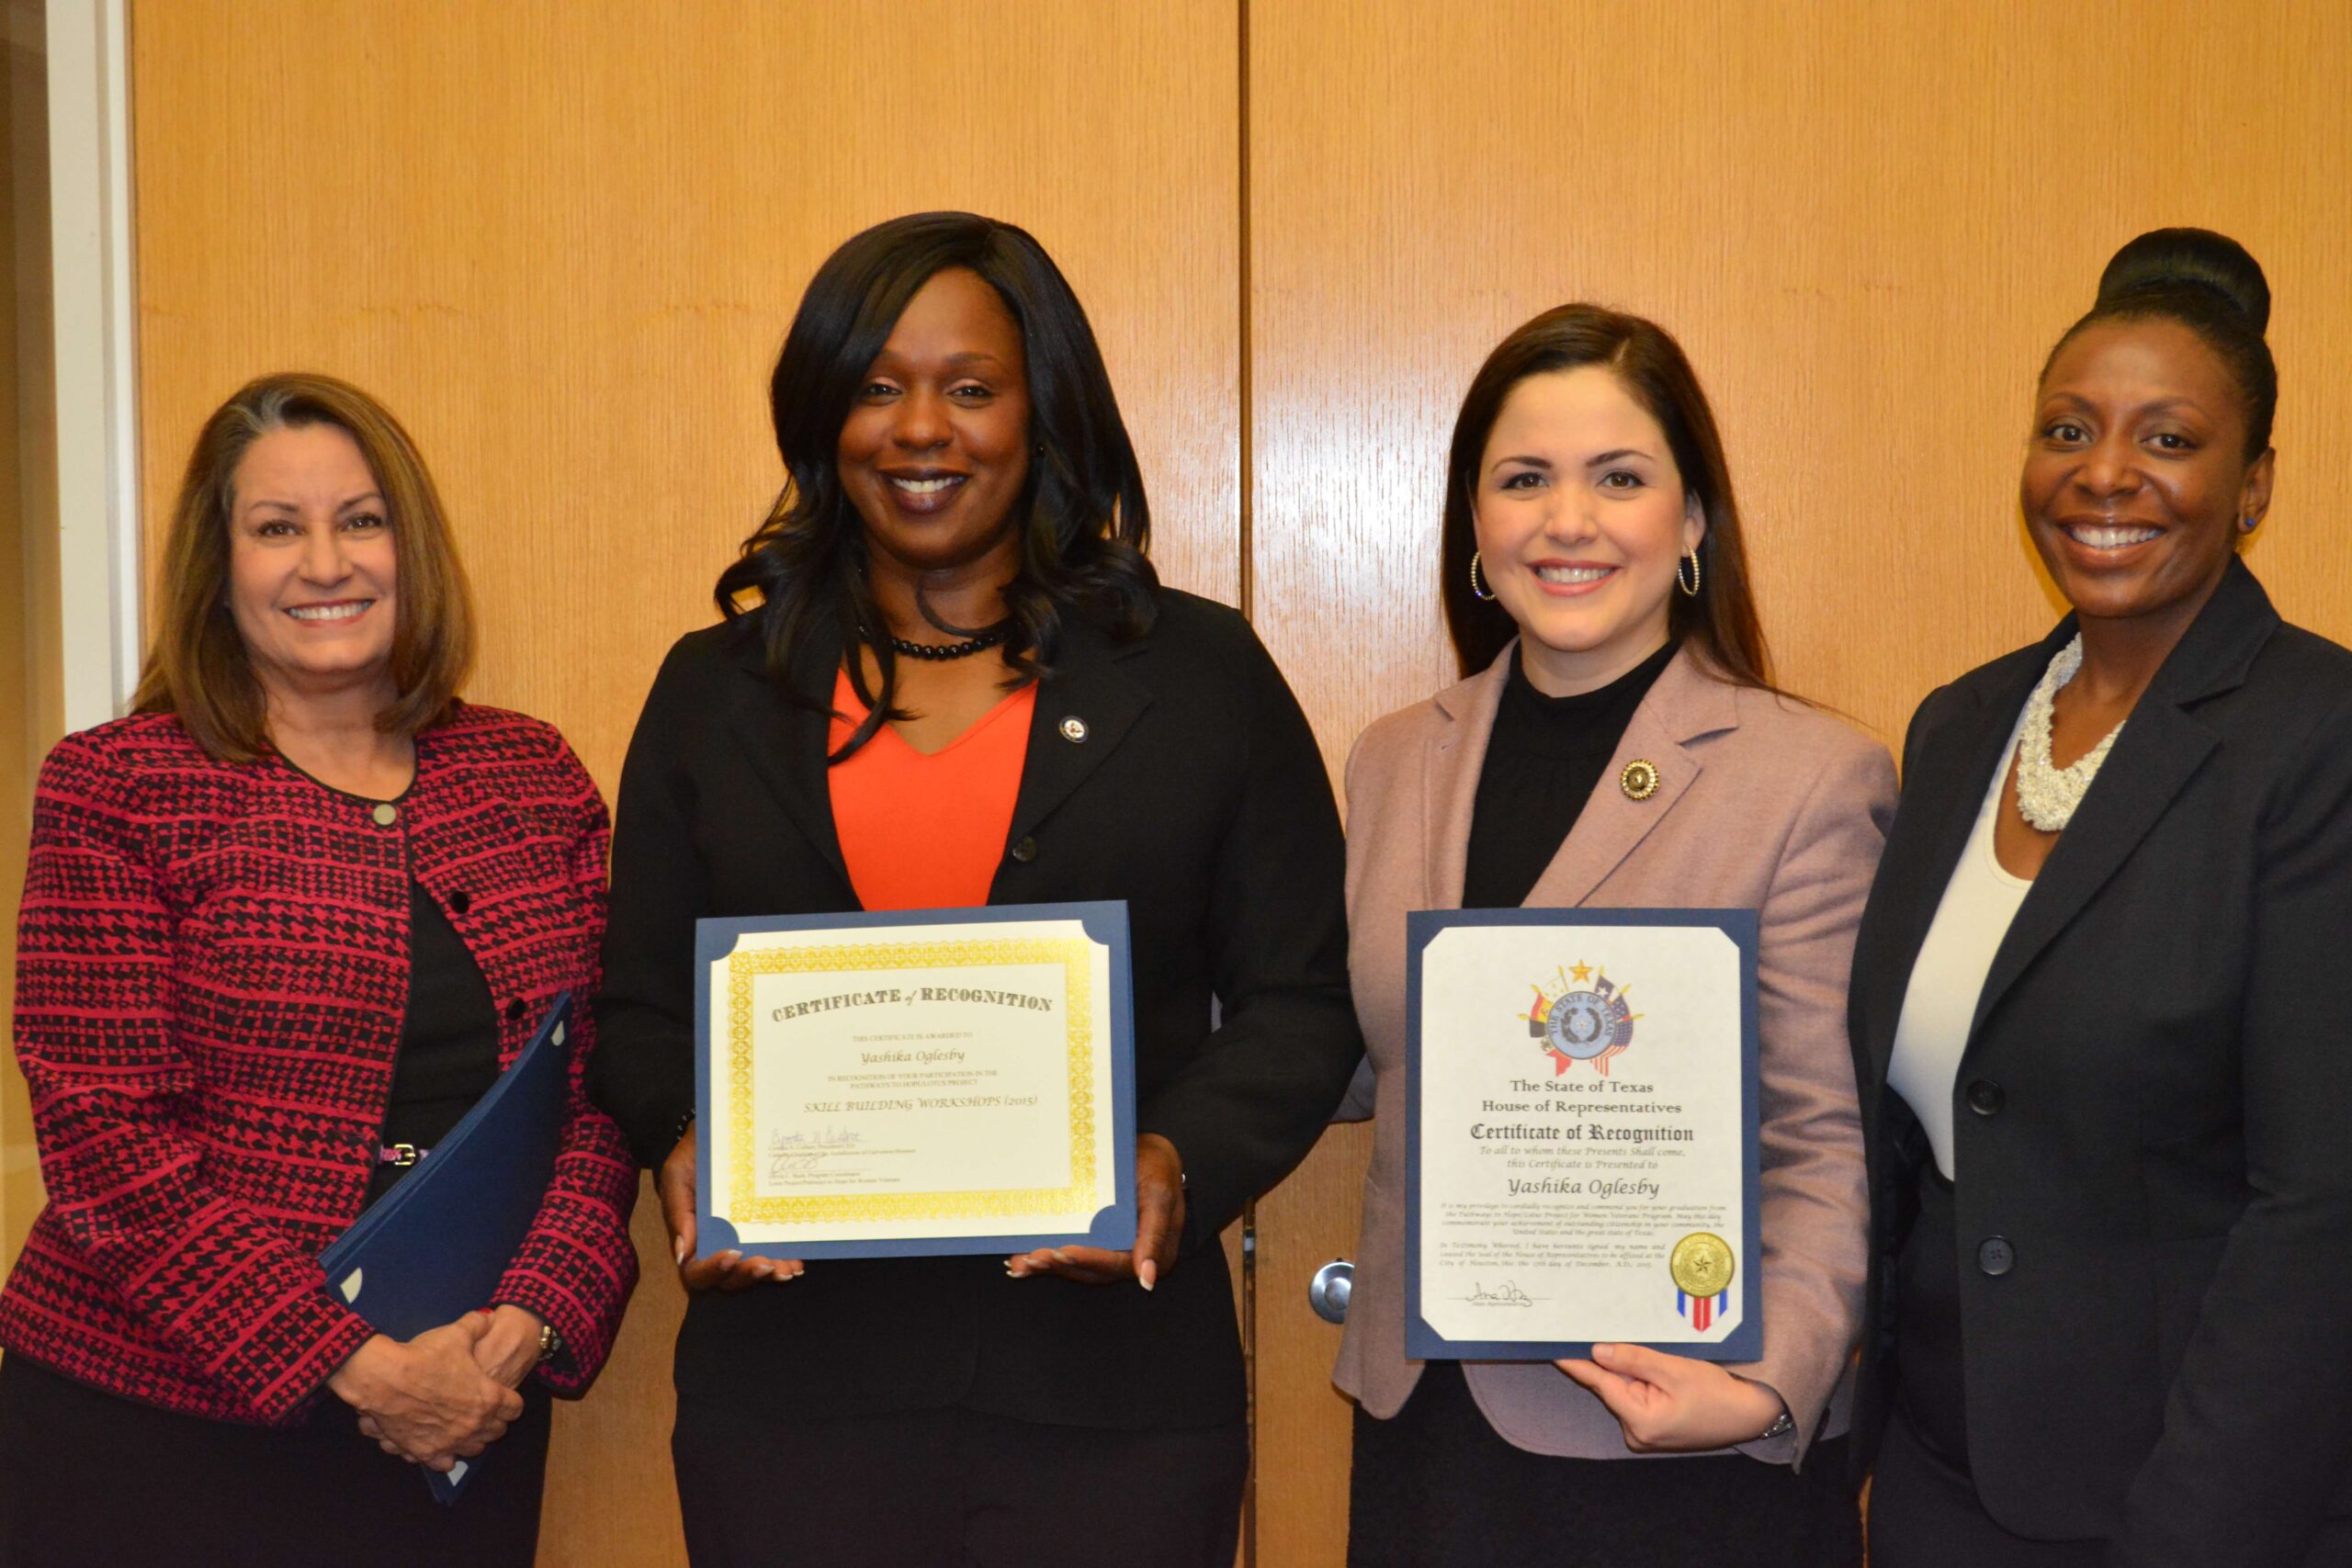 Yashika Olgesby (second from left) graduated from the Lotus Project program through Catholic Charities' Women Veteran Services. 